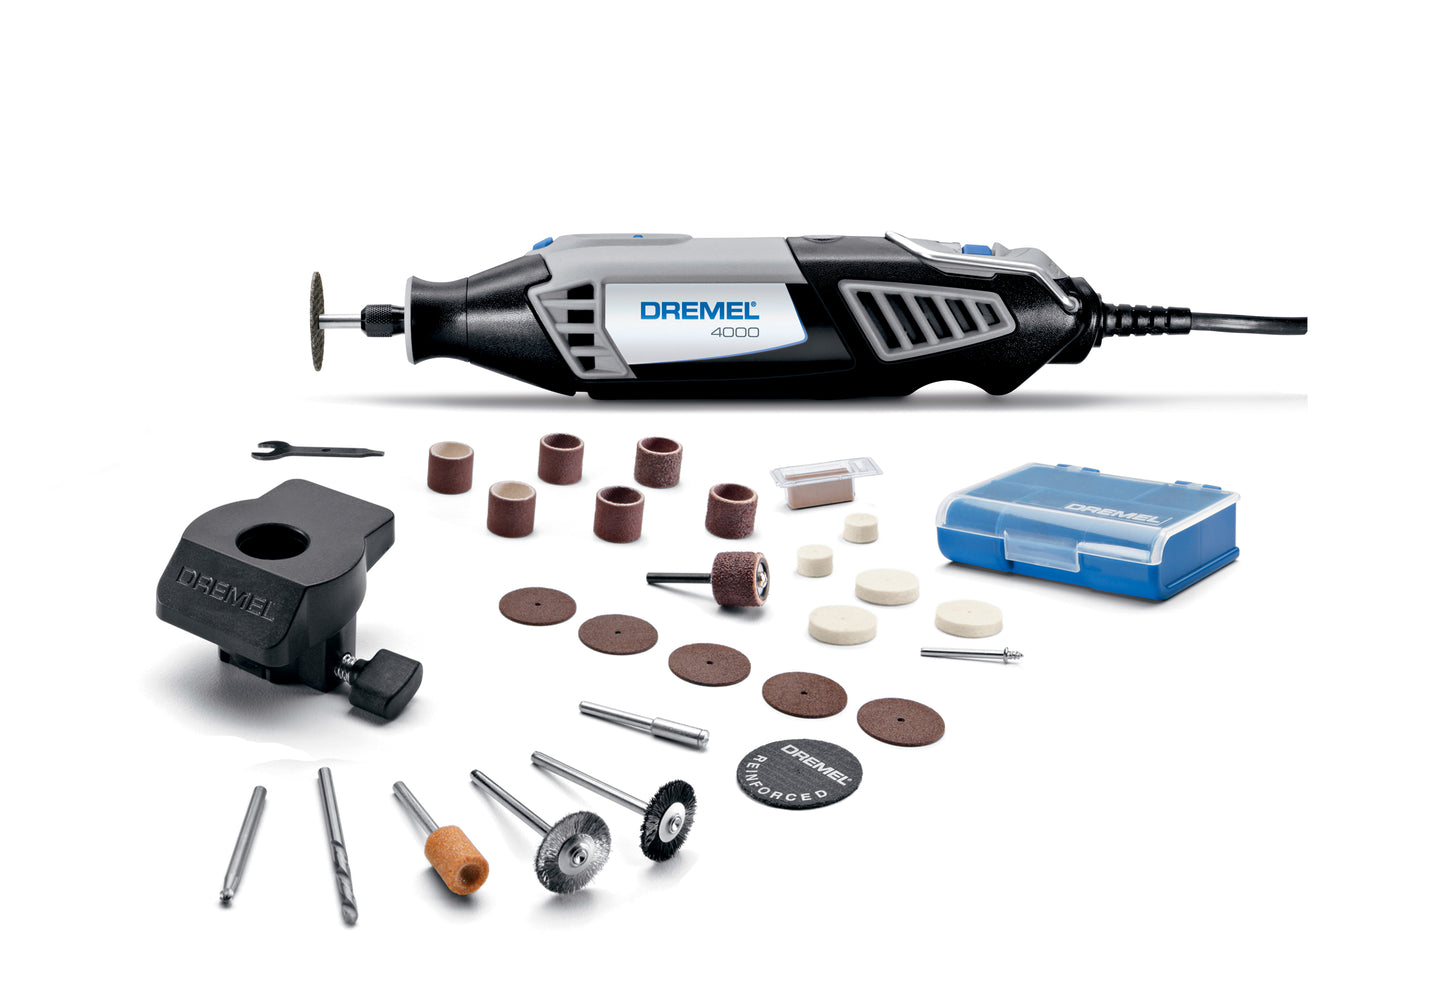 Dremel 3000 1/26 Variable Speed Rotary Tool Kit Electric Grinder 1